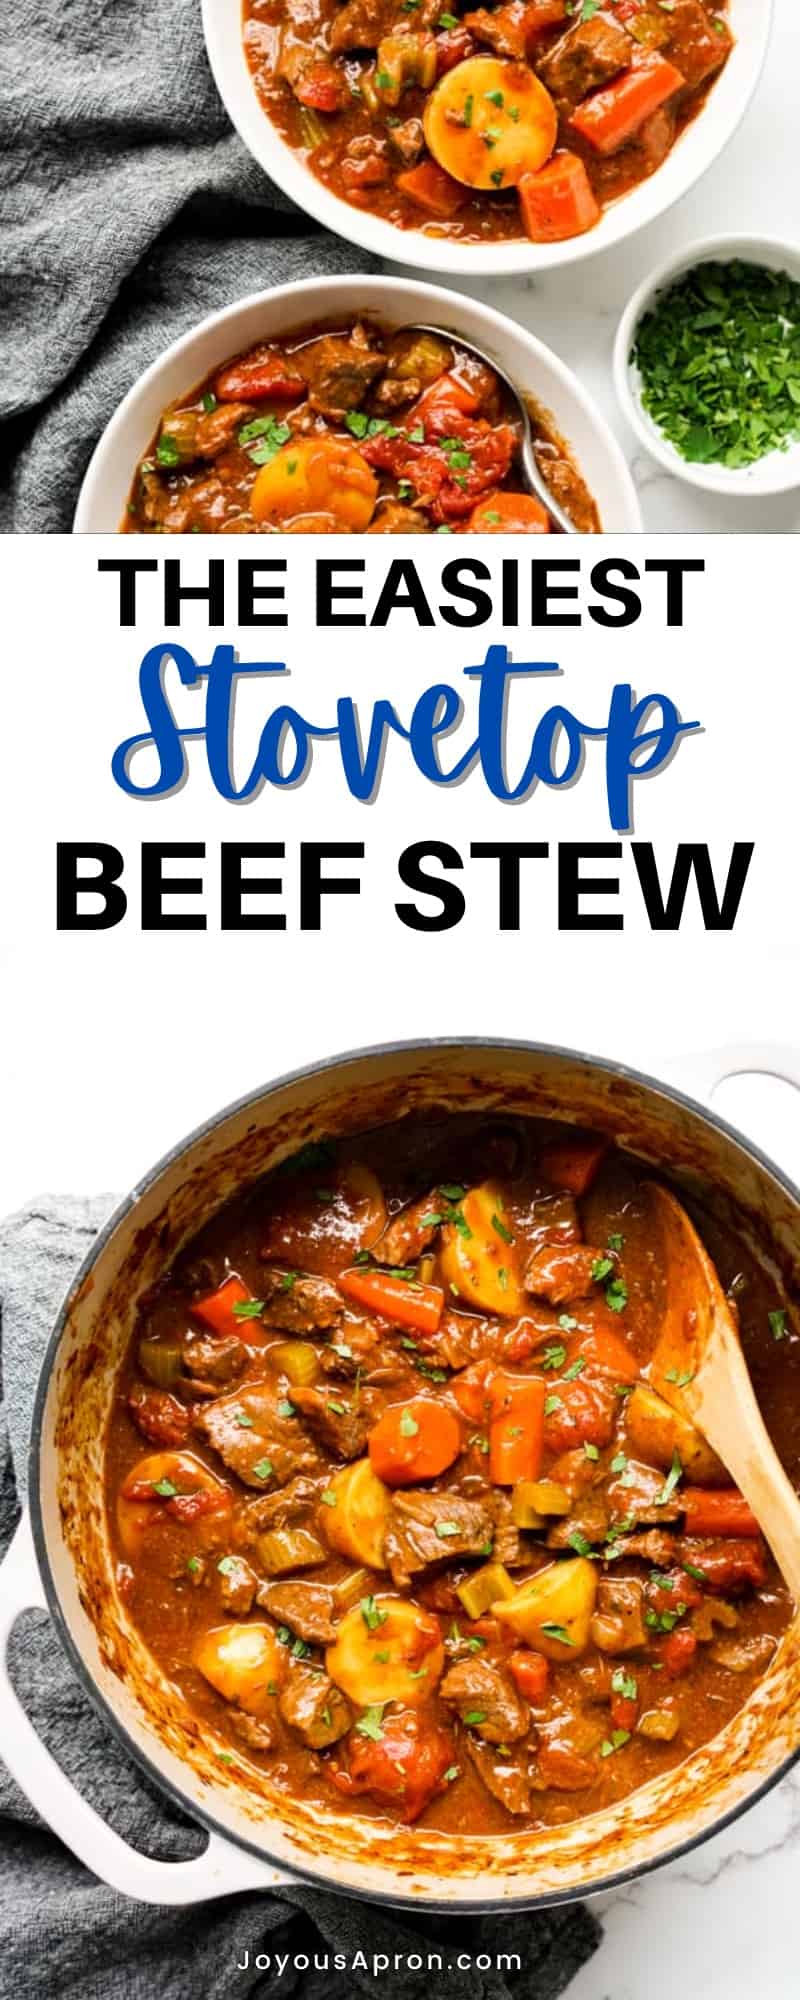 Beef Stew - the BEST easy stove top beef stew in a Dutch Oven. Flavored with red wine and herbs, combined with potatoes, tomatoes and carrots. Comfort food for the Fall and winter, it's the perfect weeknight dinner meal. via @joyousapron